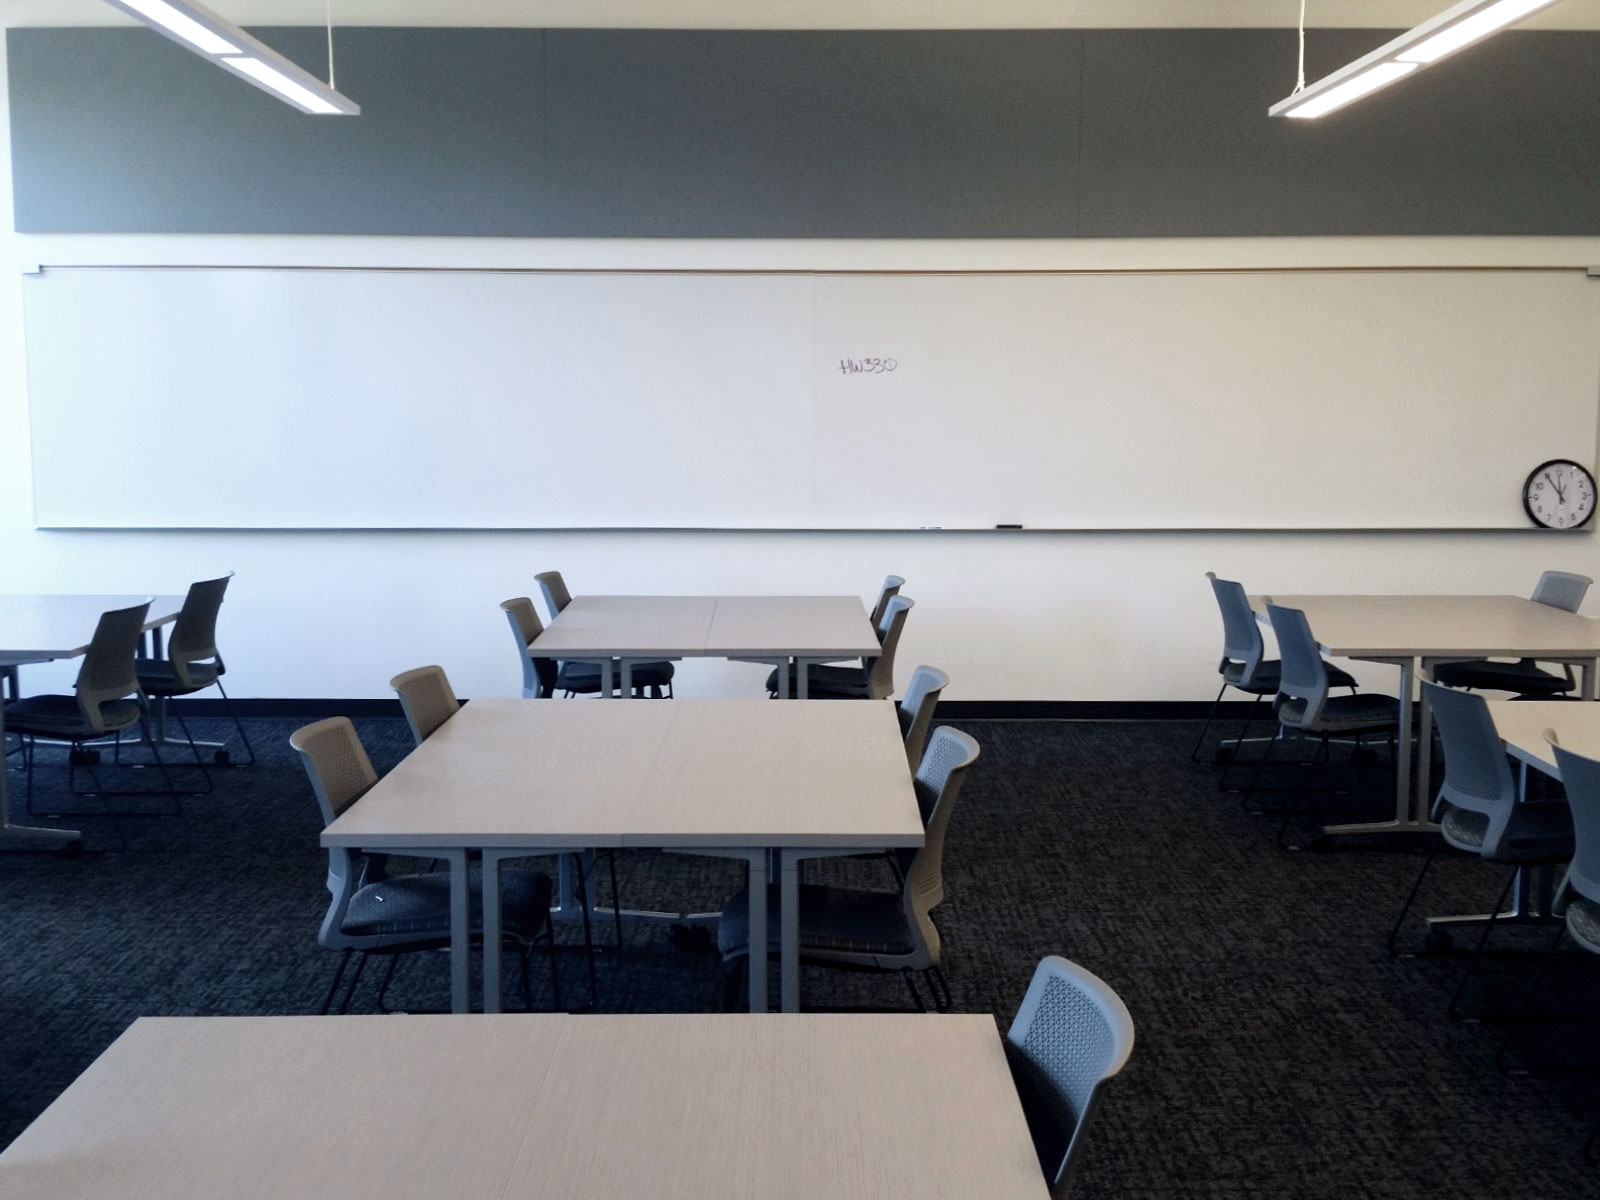 Chairs, tables and whiteboard in Harmony Campus classroom